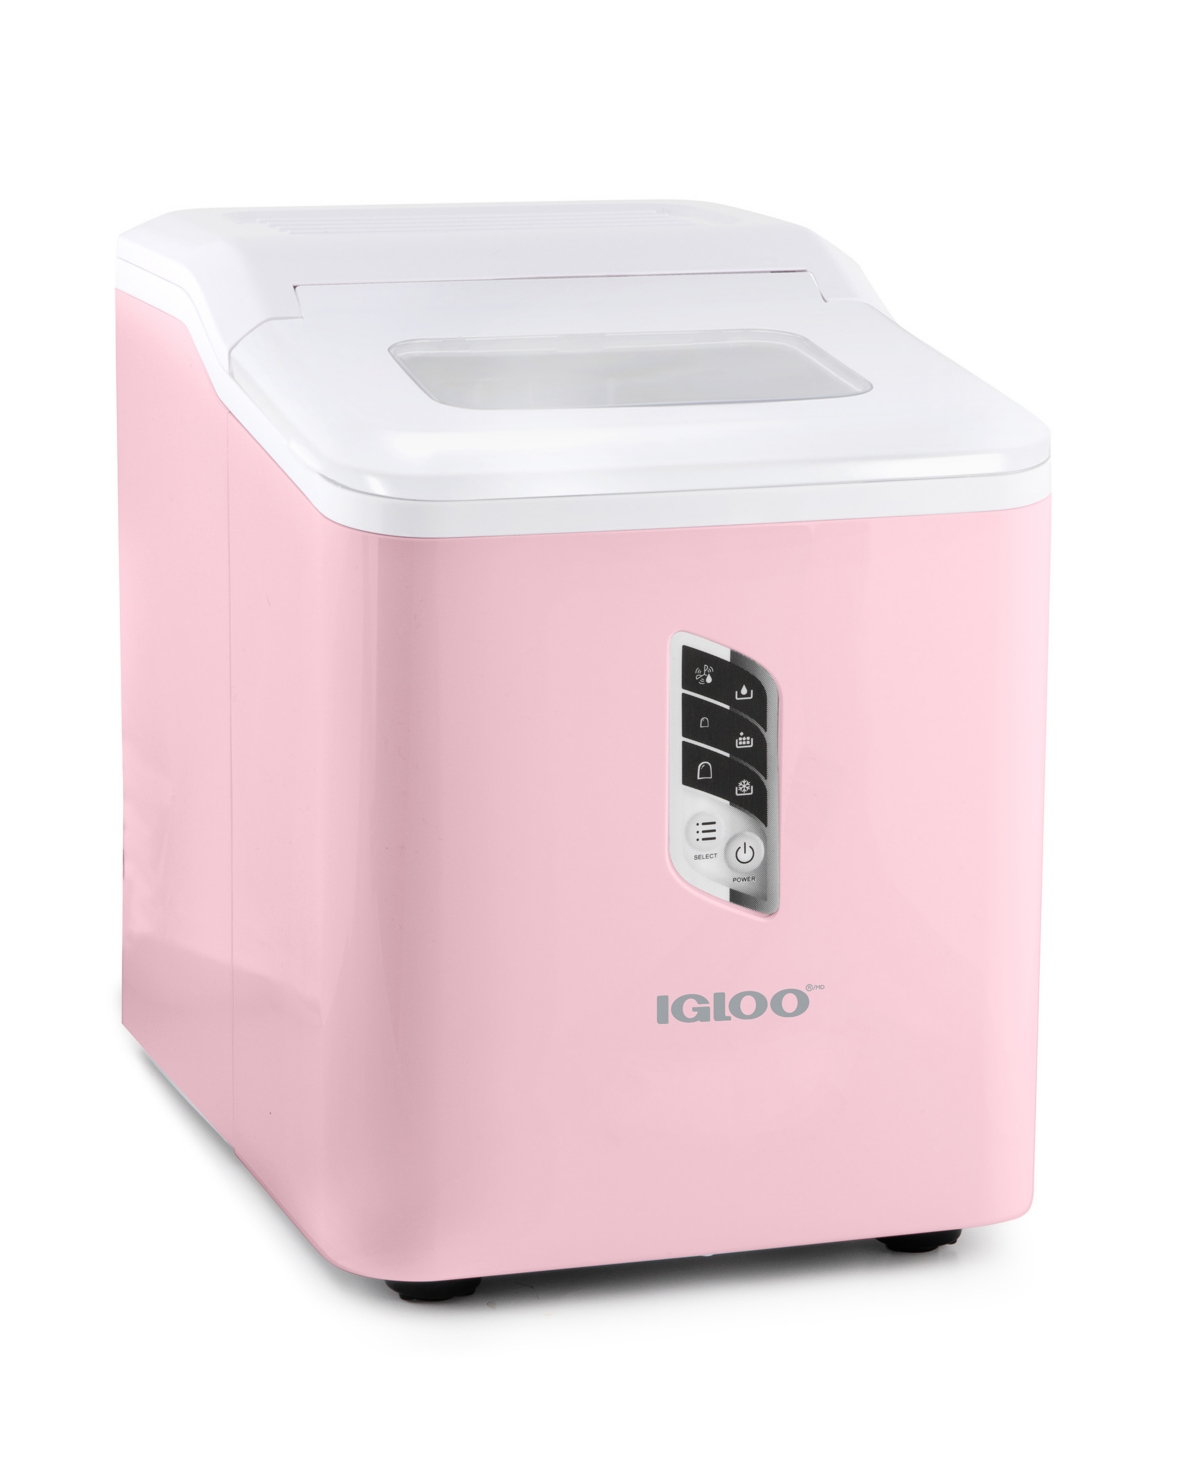 Igloo Self-cleaning 26 Pound Ice Maker Iglicebsc26pk In Pink